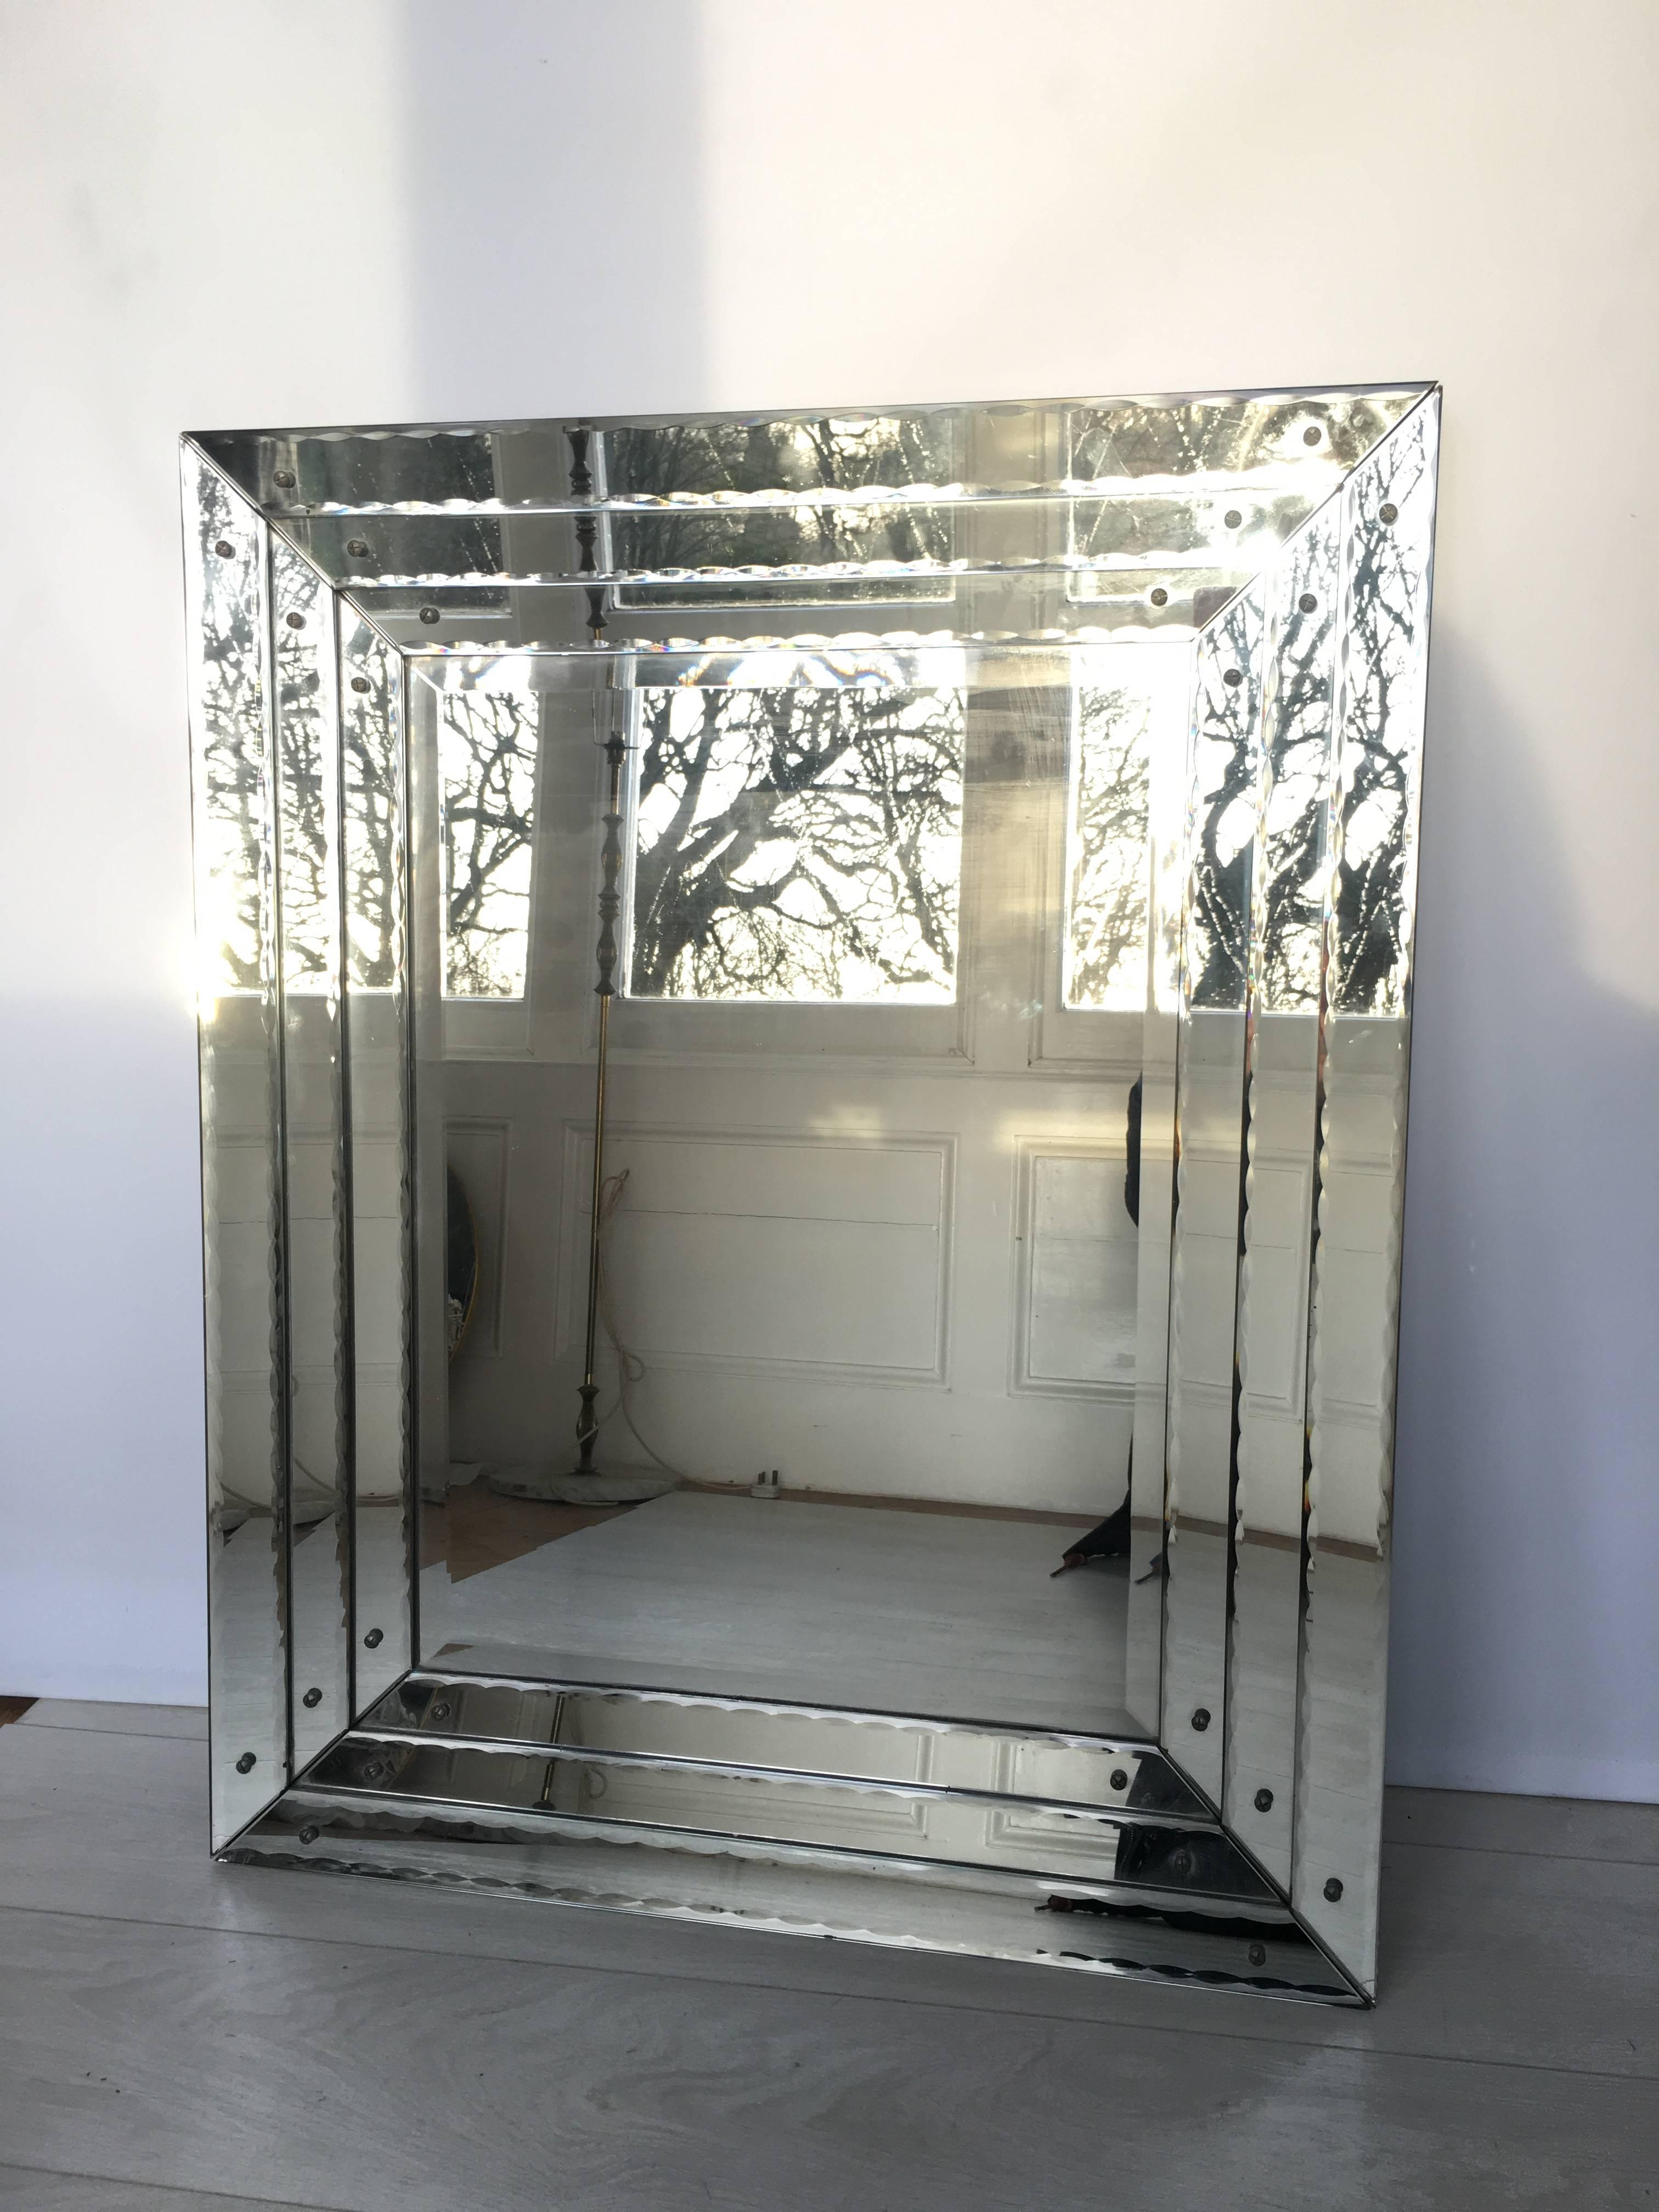 Truly stunning mirror with triple banded mirror frame. 
Each band has a scalloped edge which gives the most amazing reflection.
Some minor aging to the glass border mirror consistent with age - please see close up images. 
No chips or cracks.